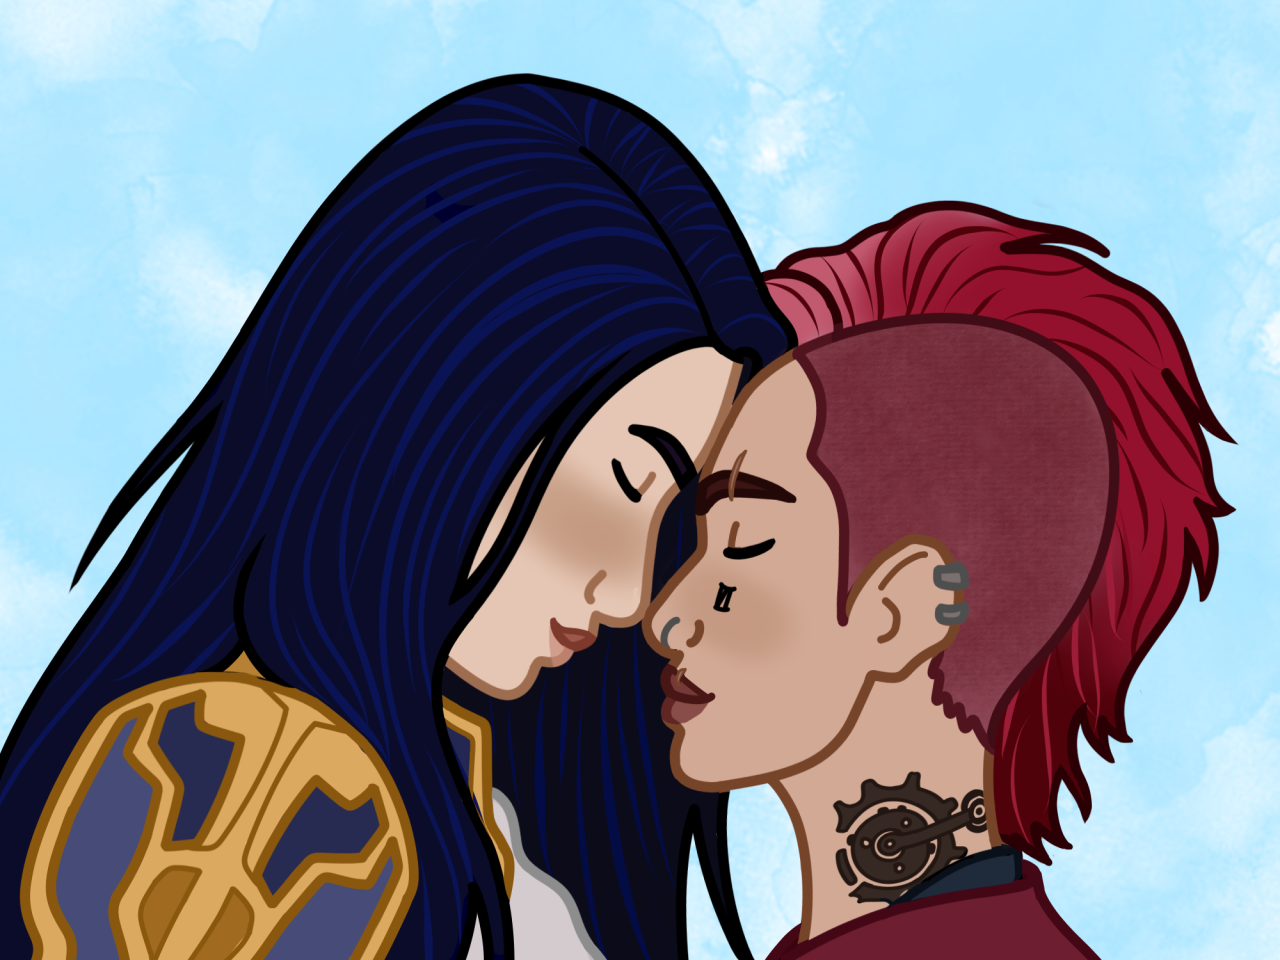 I’m not in this fandom but my friend is, so here’s my first drawing of the year! #wanted to experiment with some funky lines but... eeehhhh  #idk how I feel about em  #frik what else was I gonna say  #whatre these guys names  #vi x caitlyn  #thank you auto tags #arcane#sleepyselkiesiren art #apparently Im just not good at doing art in January  #I had so many I wanted to do #but alas #still dont like how I draw hair lines  #although messing around with brush textures for the buzz cut was kinda fun